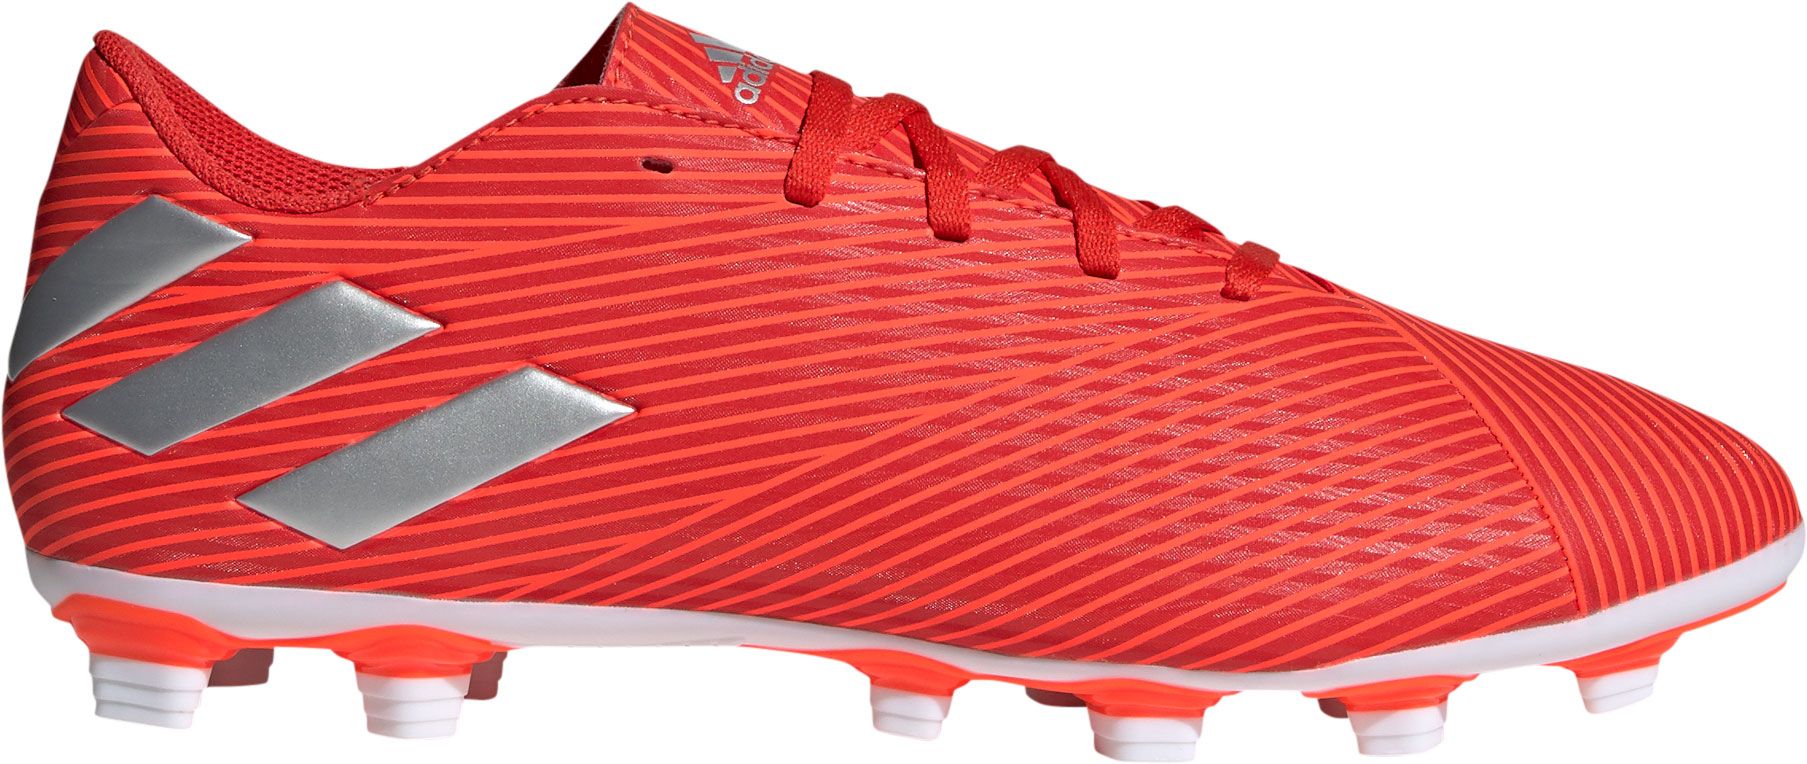 messi red and white cleats